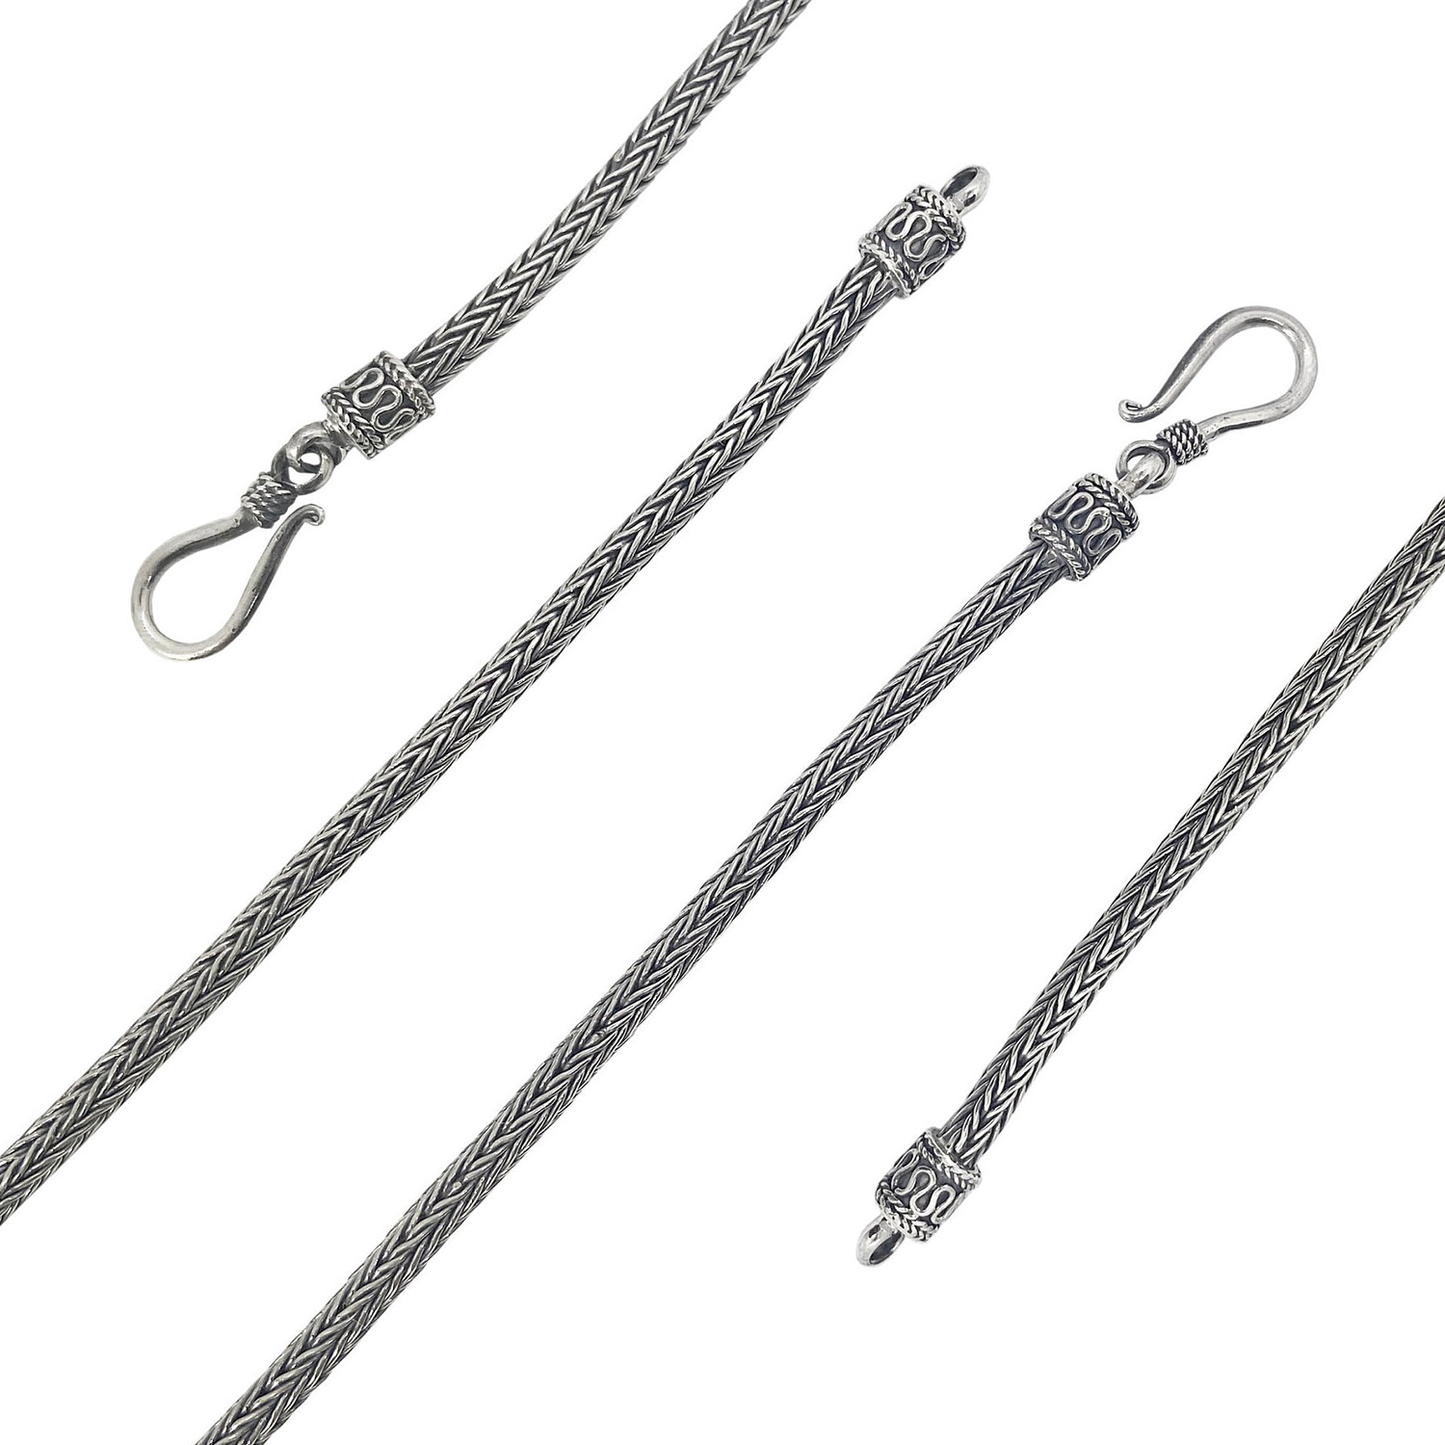 Mens Snake Chain Necklace - 3mm